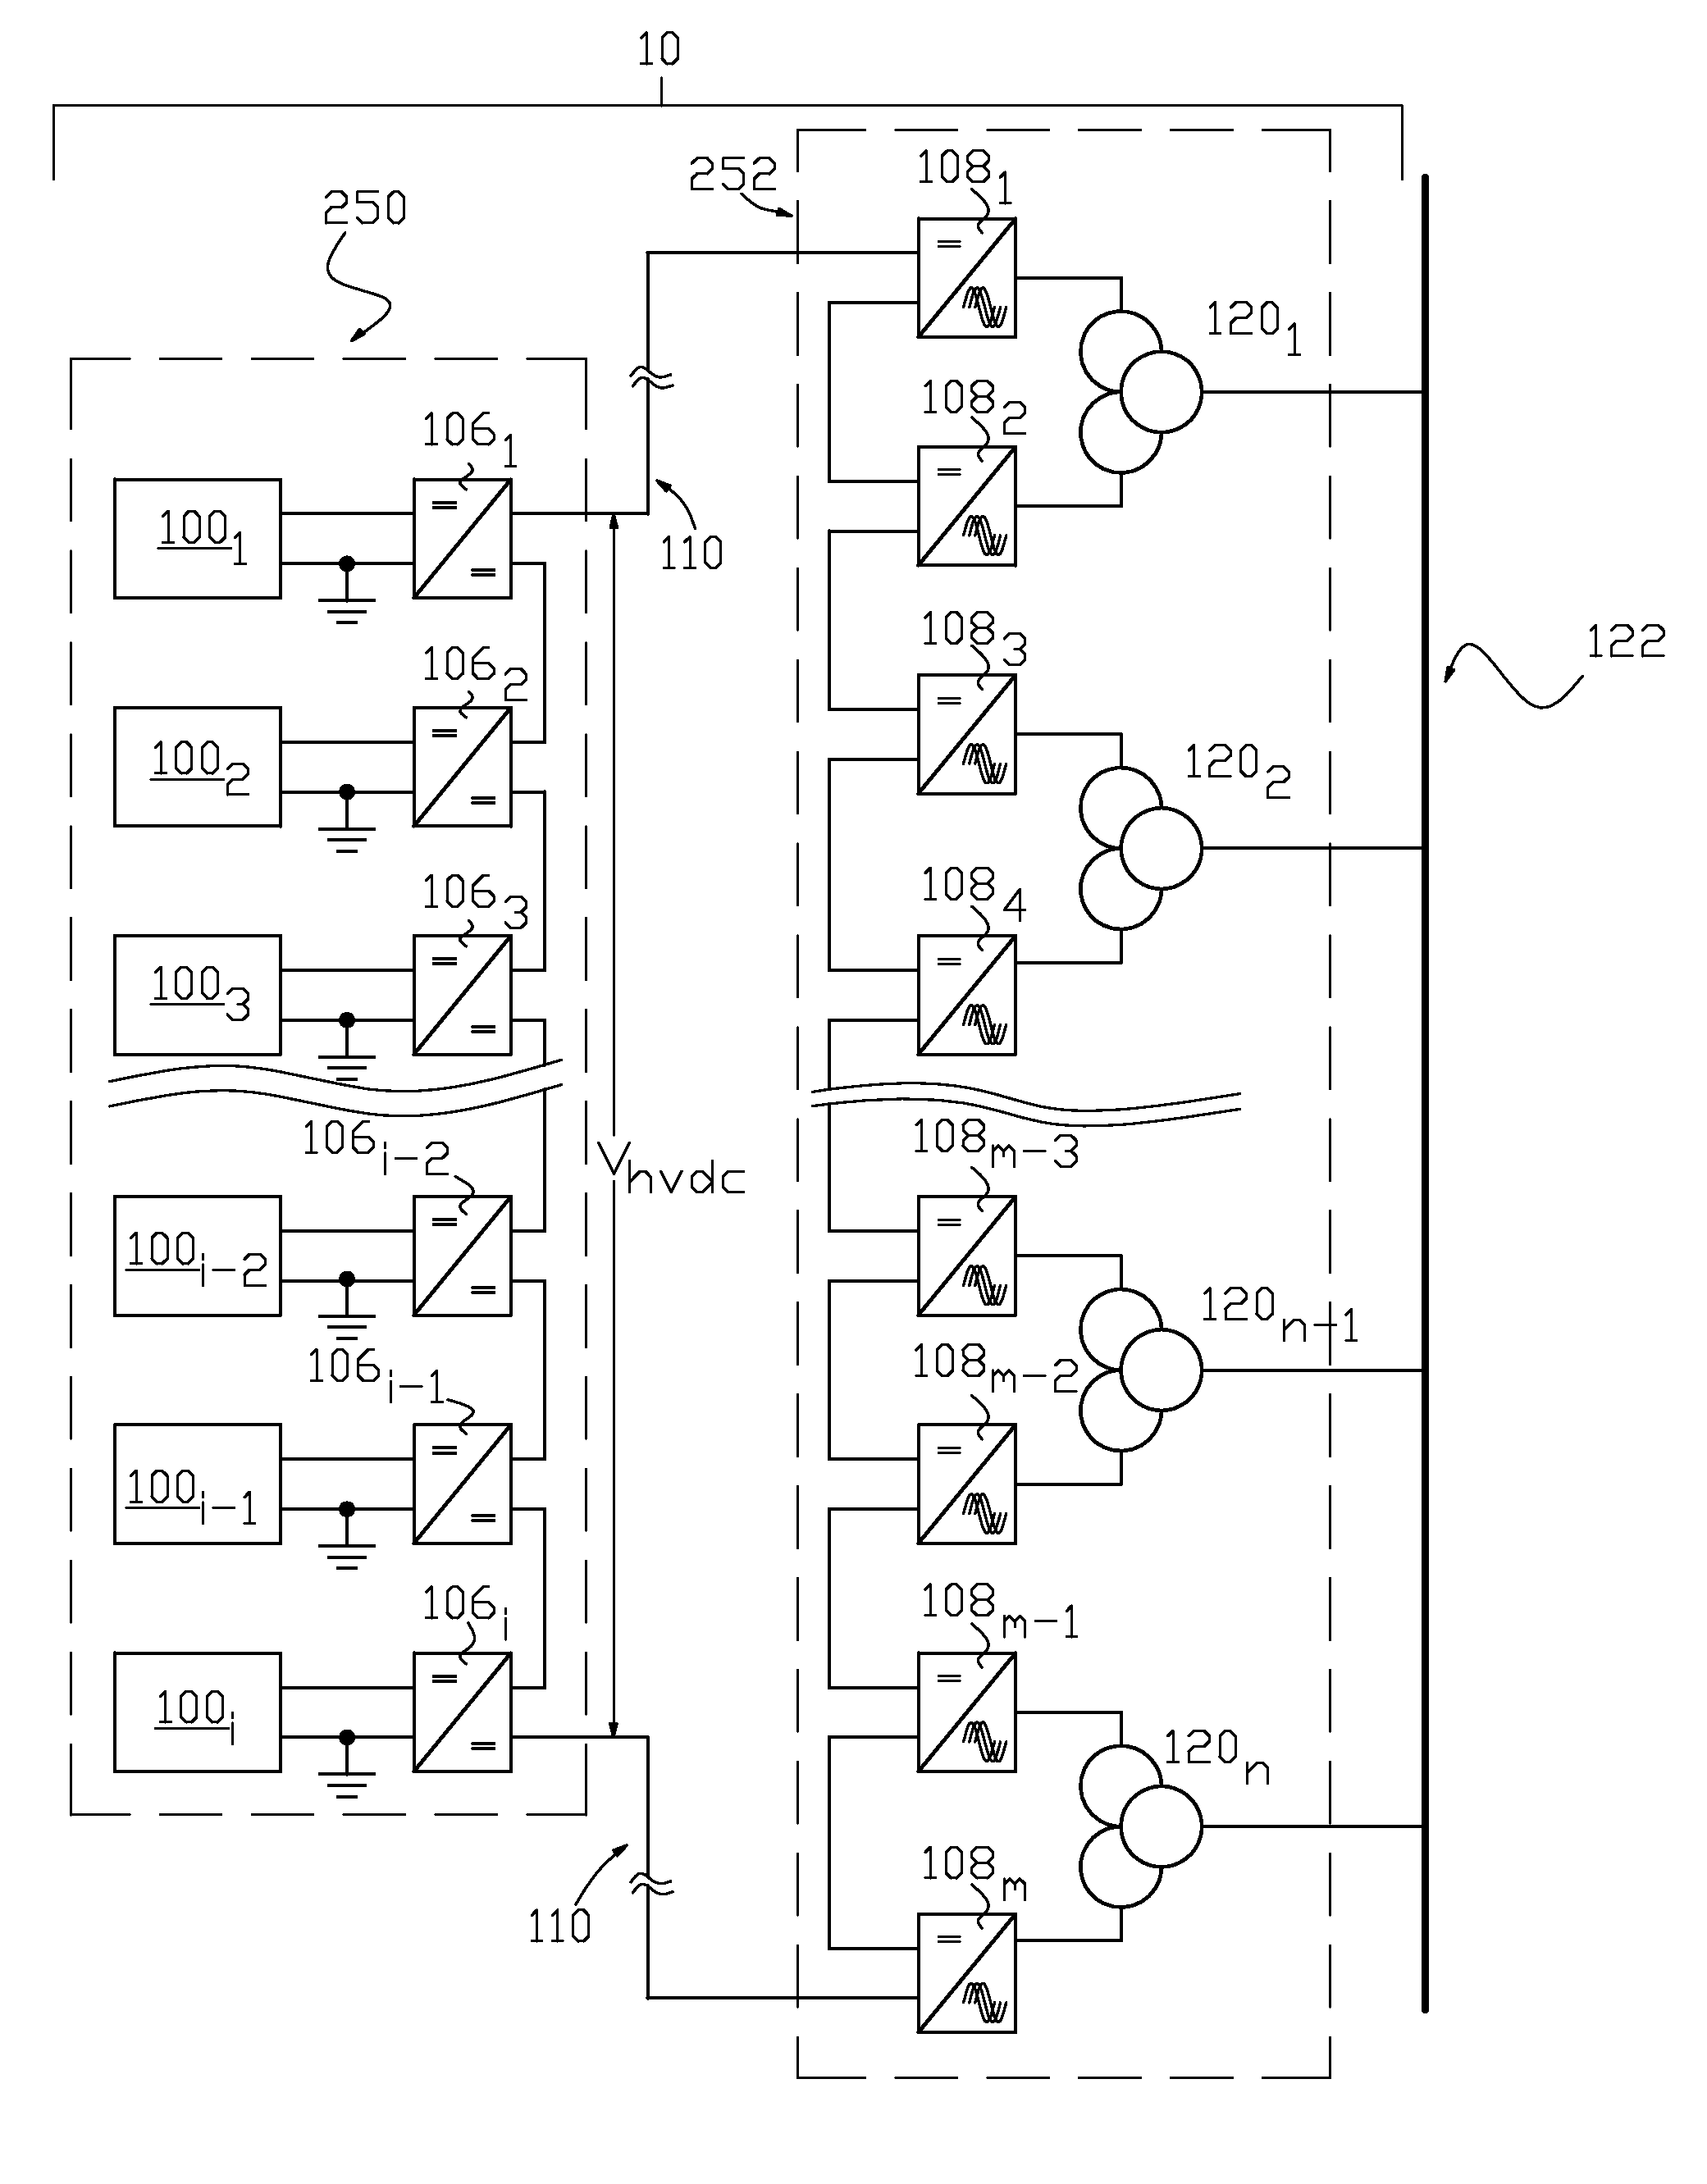 Solar Photovoltaic Power Collection via High Voltage, Direct Current Systems with Conversion and Supply to an Alternating Current Transmission Network